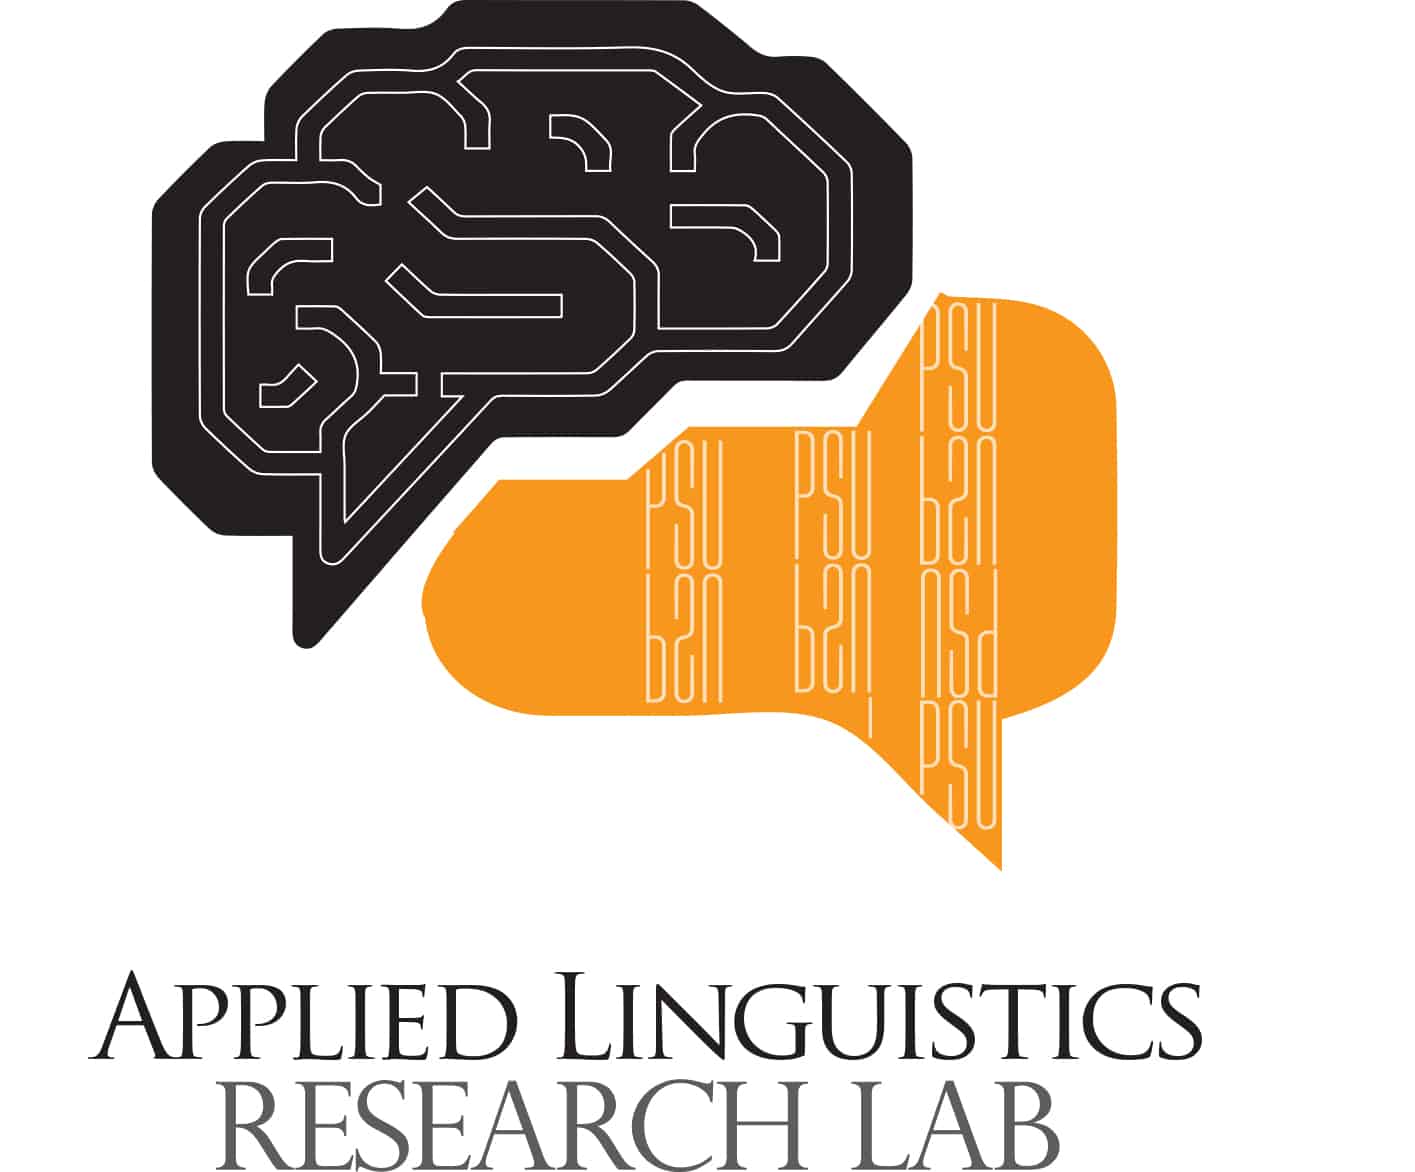 The Applied Linguistics Research Lab Holds a Seminar in Collaboration with the Regional English Language Office at the US Embassy